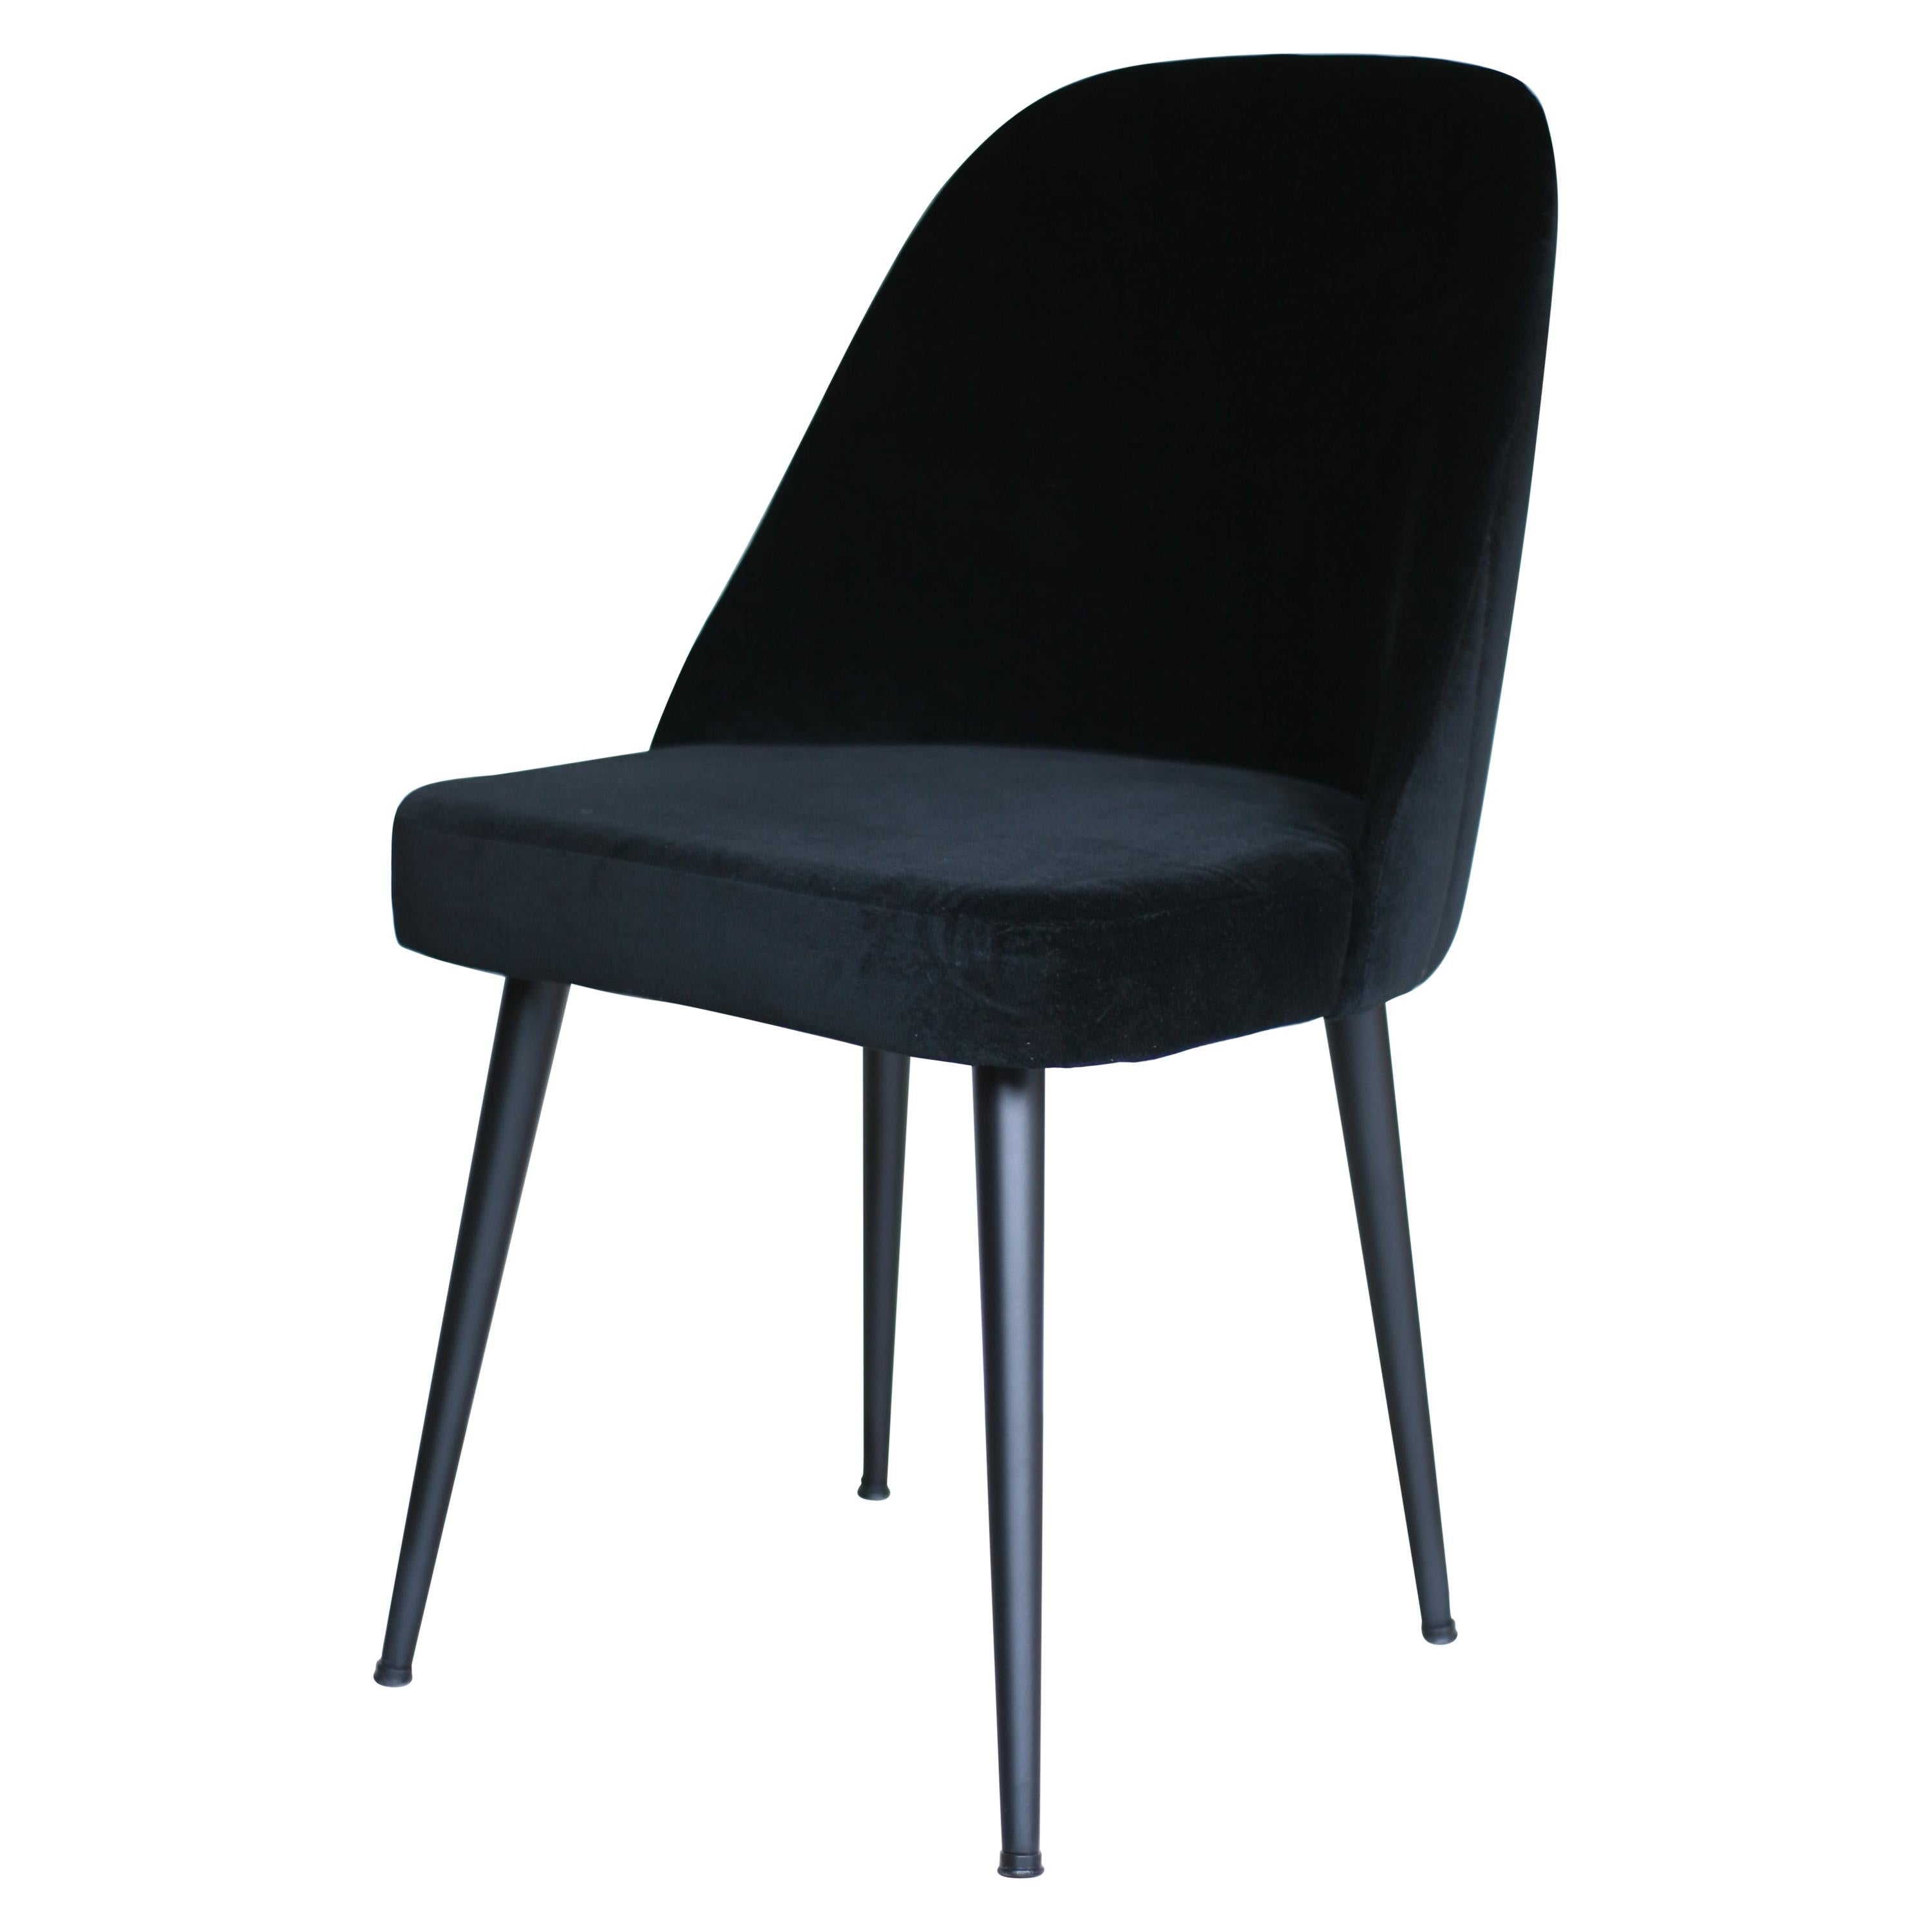 Modern Ebony Black Velvet Fabric Chair with Decorative Back and Steel Black Base For Sale